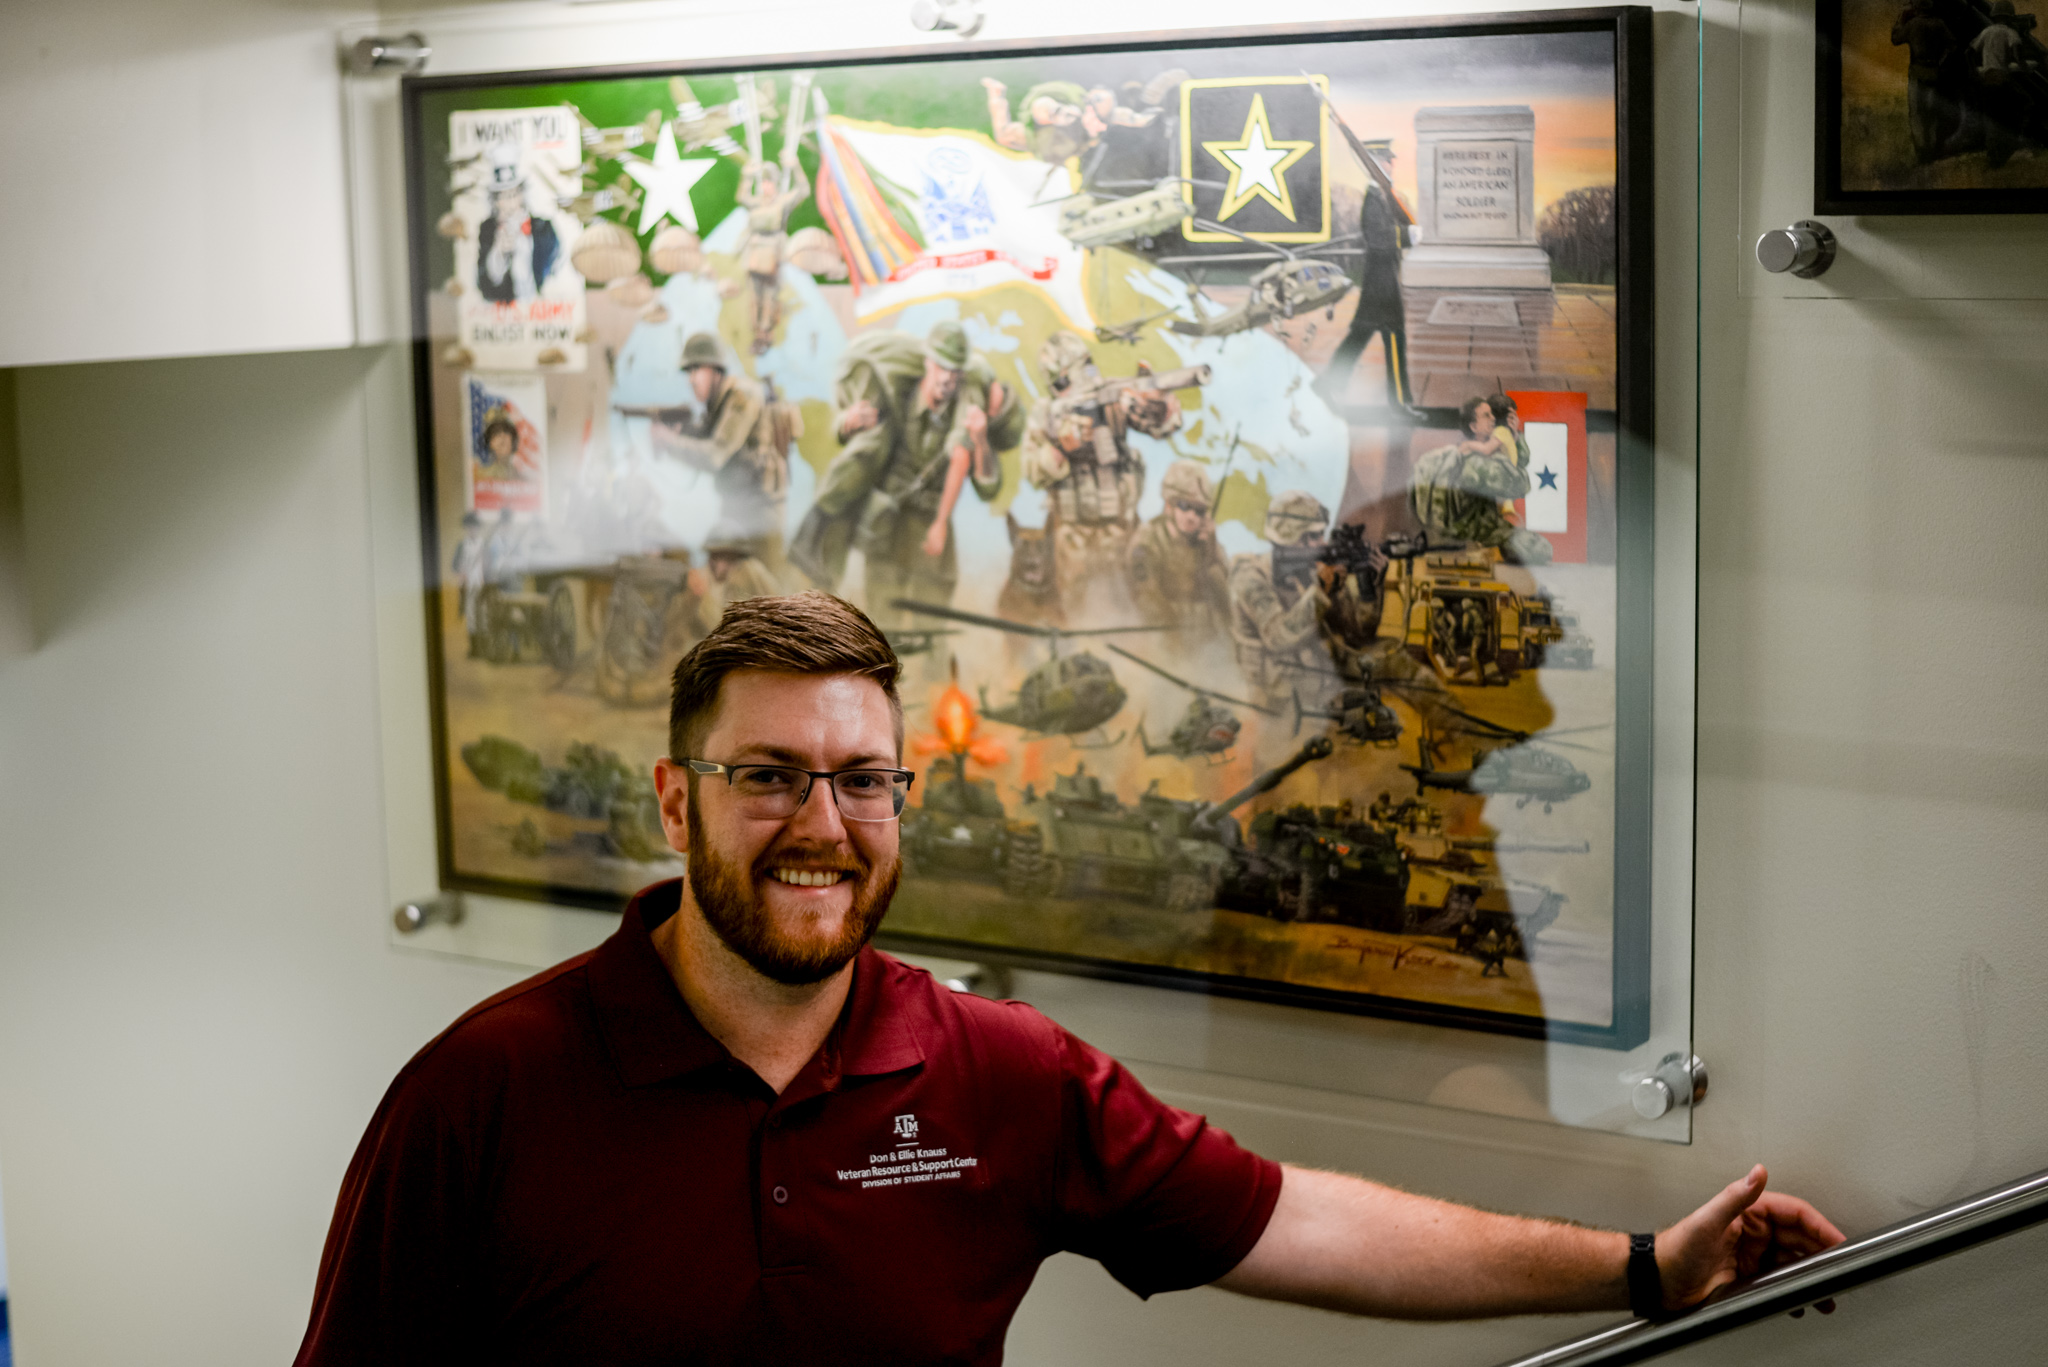 Dakota Kridler wears a maroon polo and smiles while standing in front of the U.S. Army portrait from the defenders of freedom series outside the VRSC.